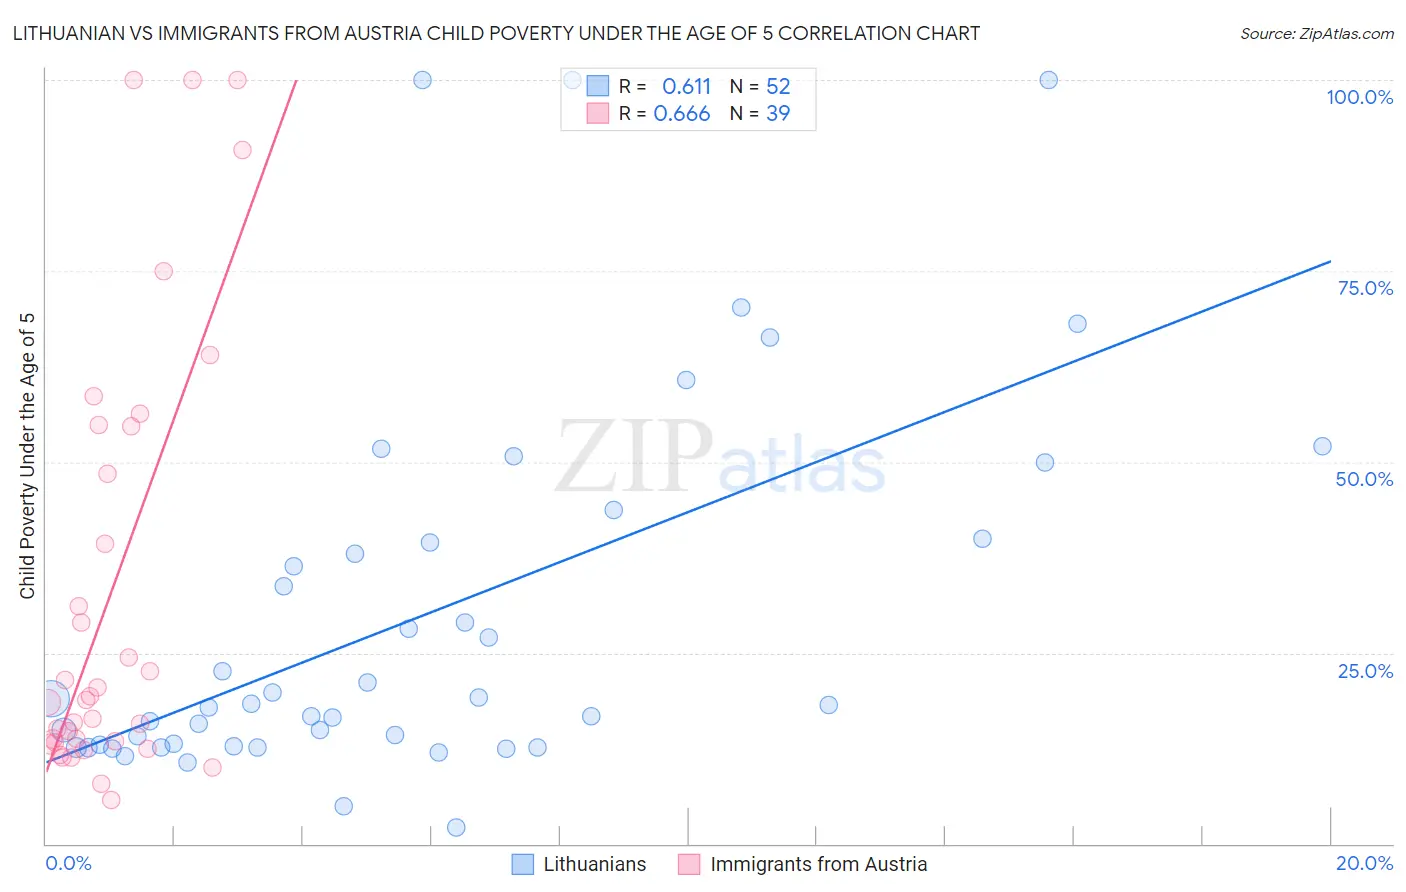 Lithuanian vs Immigrants from Austria Child Poverty Under the Age of 5